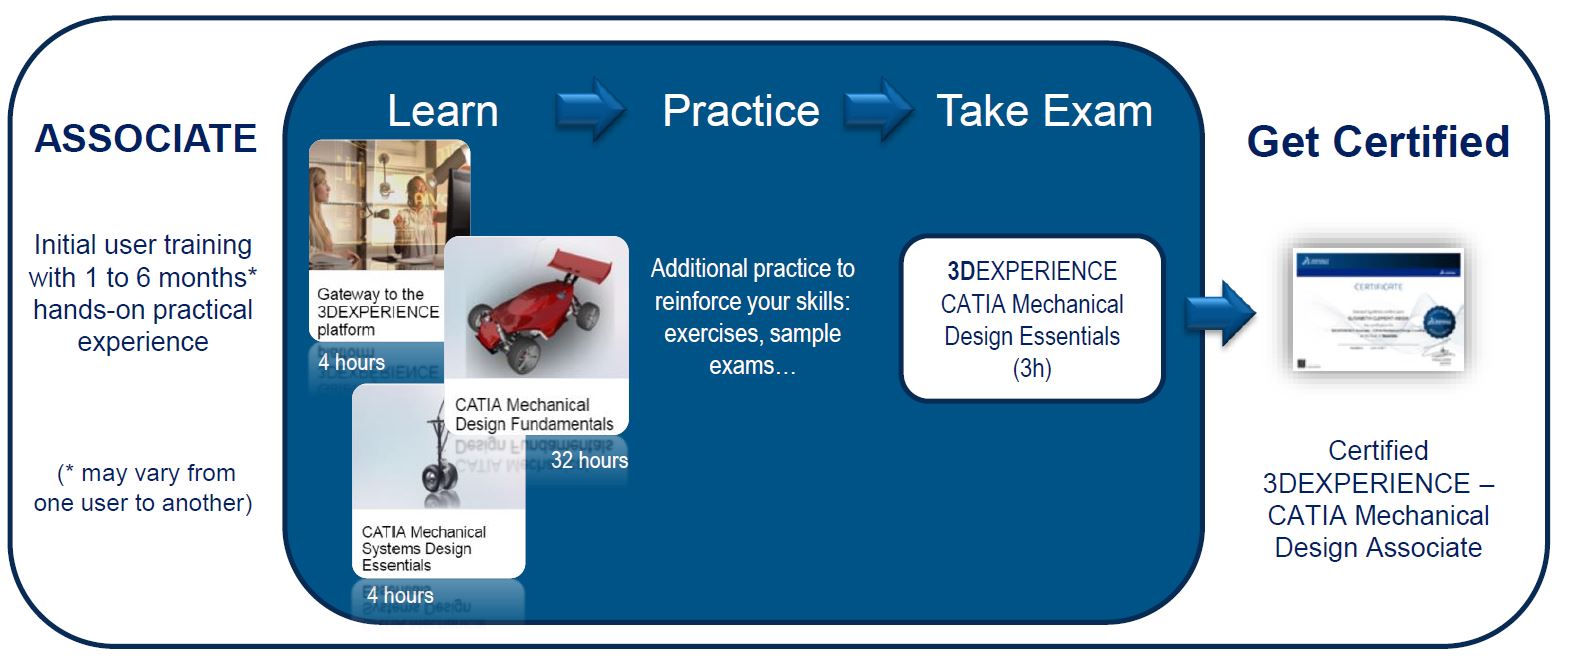 KEONYS - Certified training center of Dassault Systèmes solutions - 3DEXPERIENCE certification program